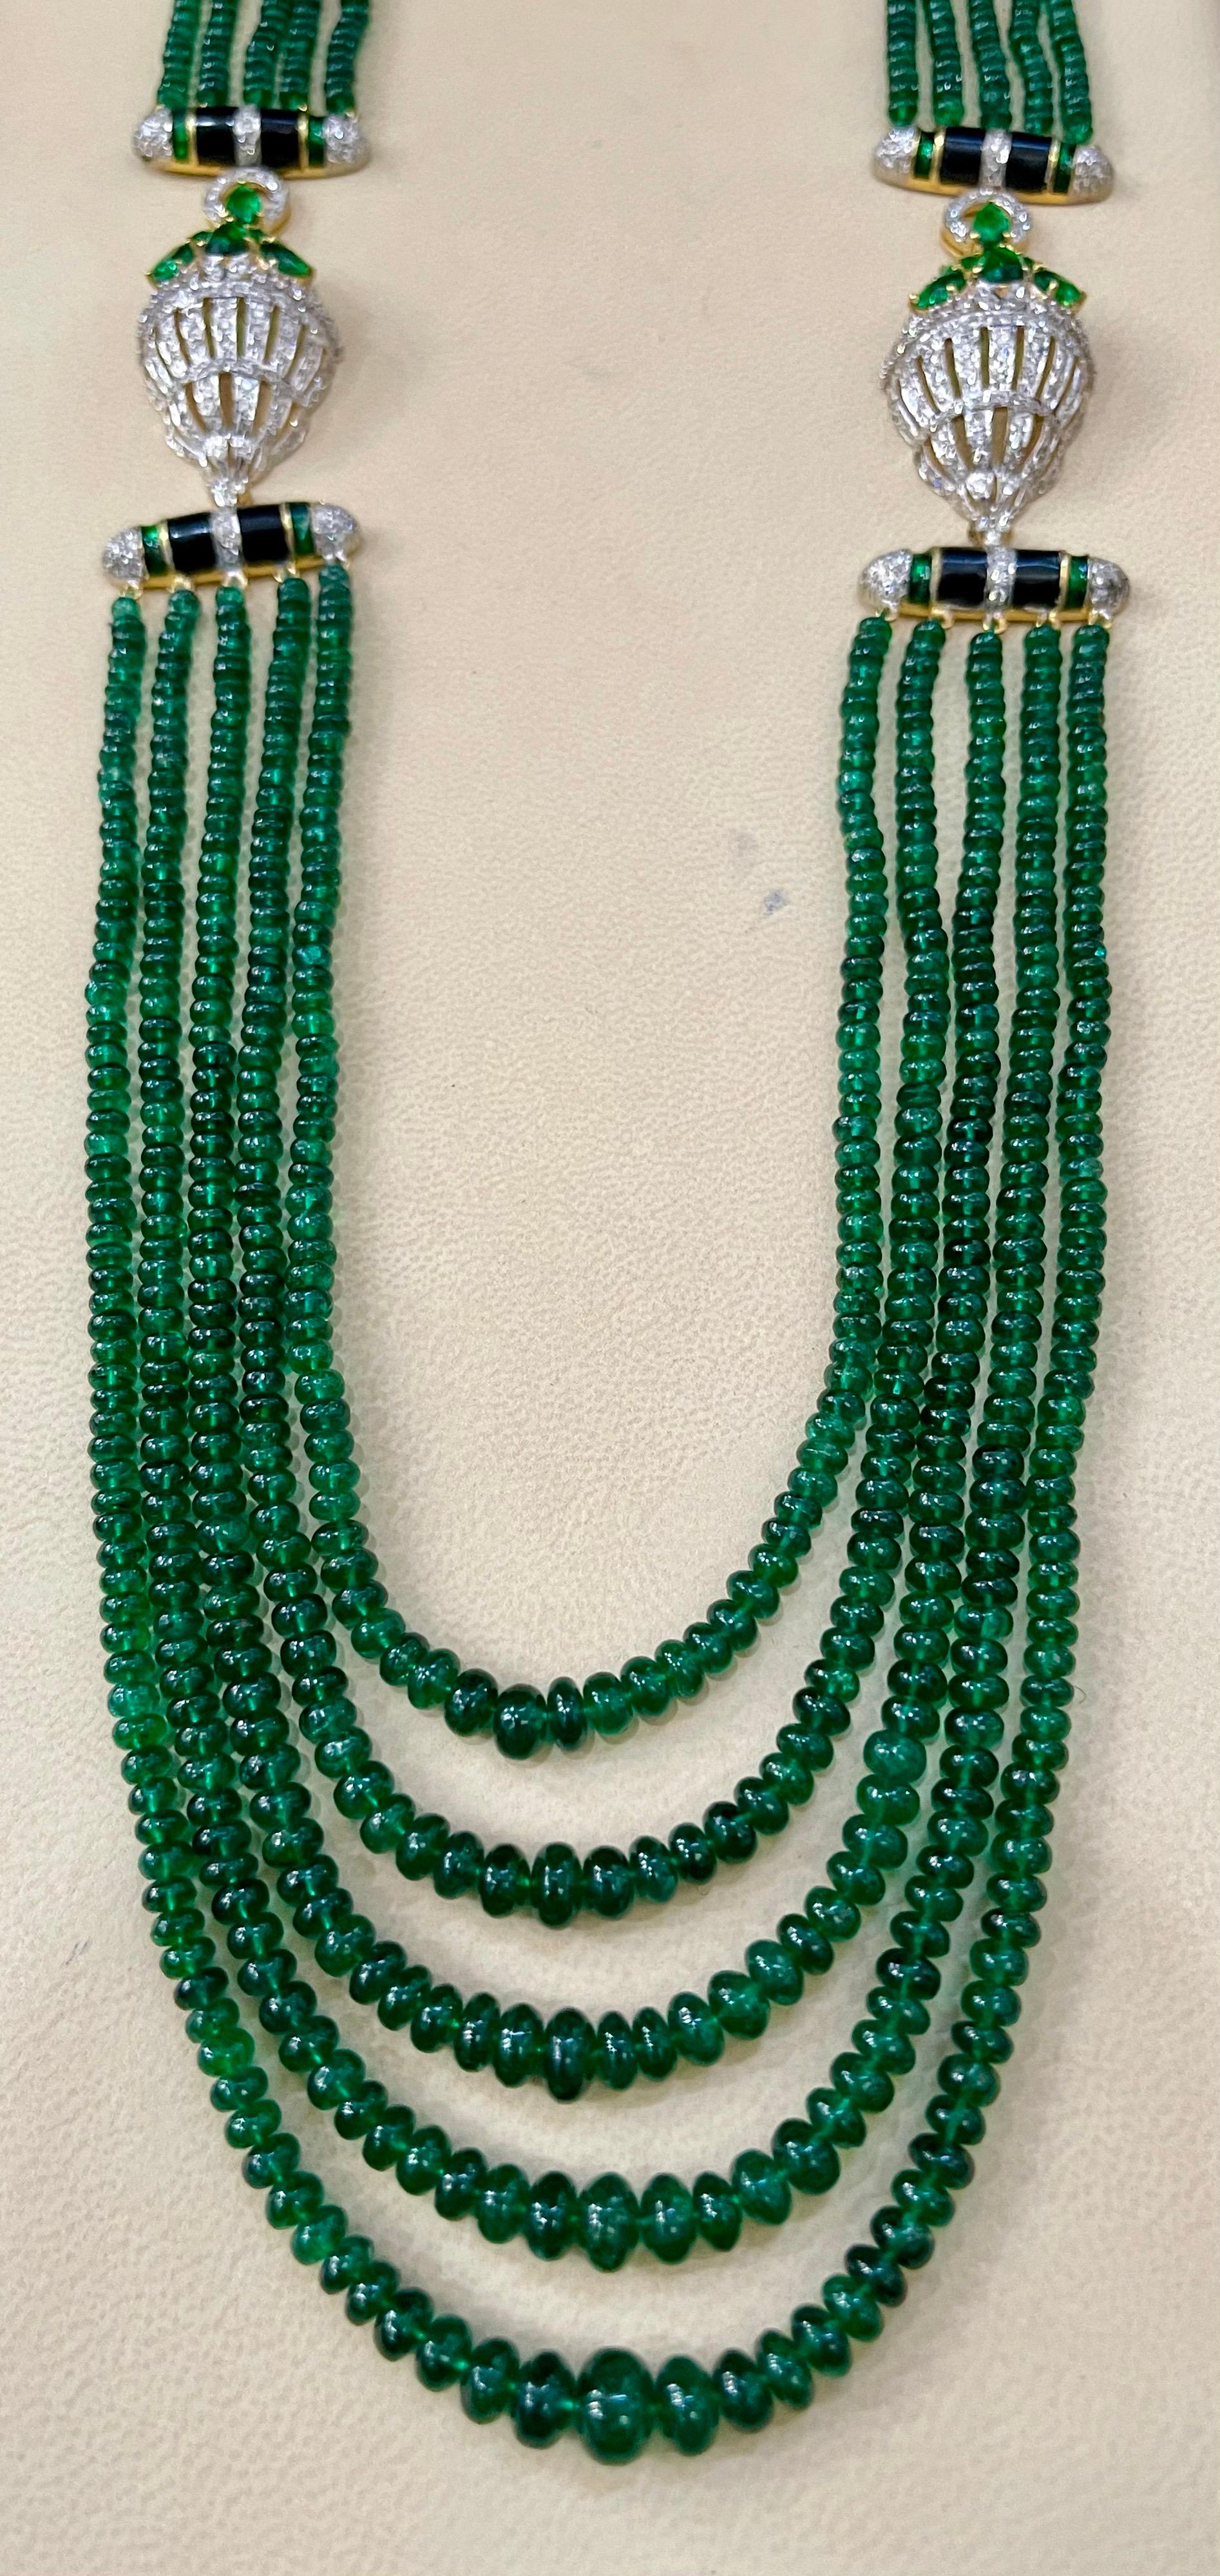 Women's 335 Carat 5-Strand Emerald Necklace with 6.5 Carat Diamond & Enamel in 14k Gold For Sale